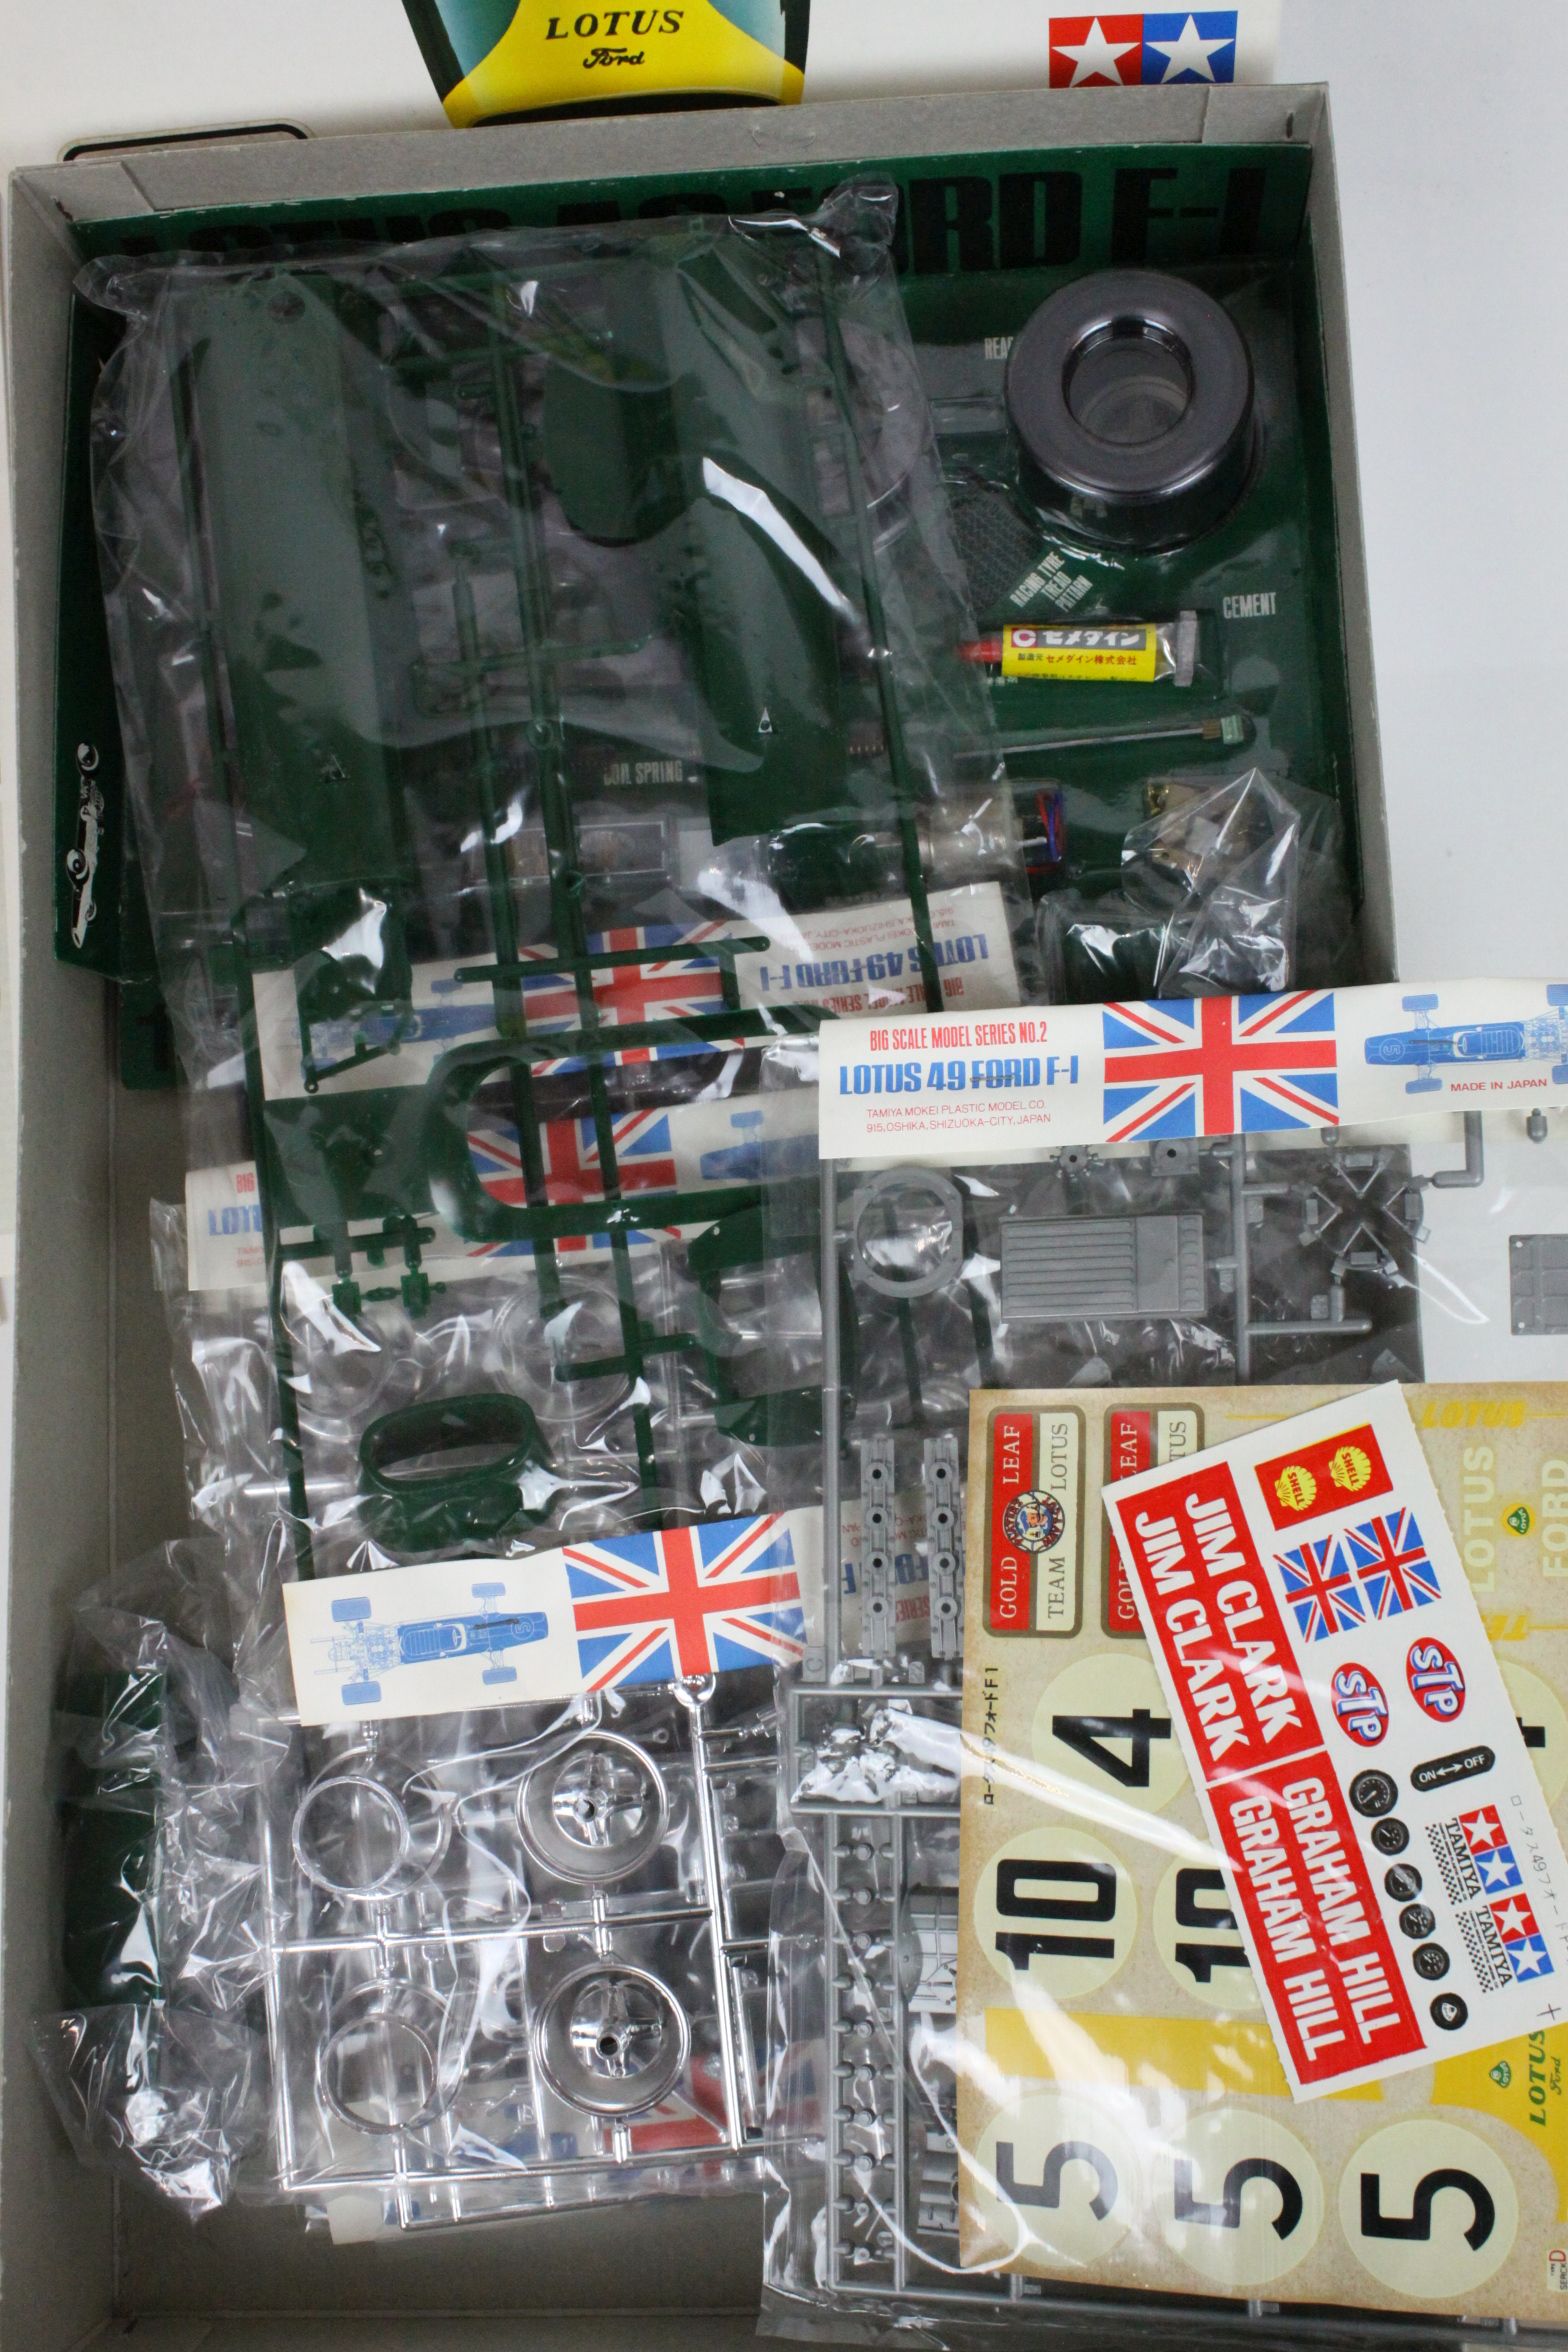 Boxed and unbuilt Tamiya 1:12 Lotus 49 Ford F1 plastic model kit, complete and excellent, very small - Image 4 of 5